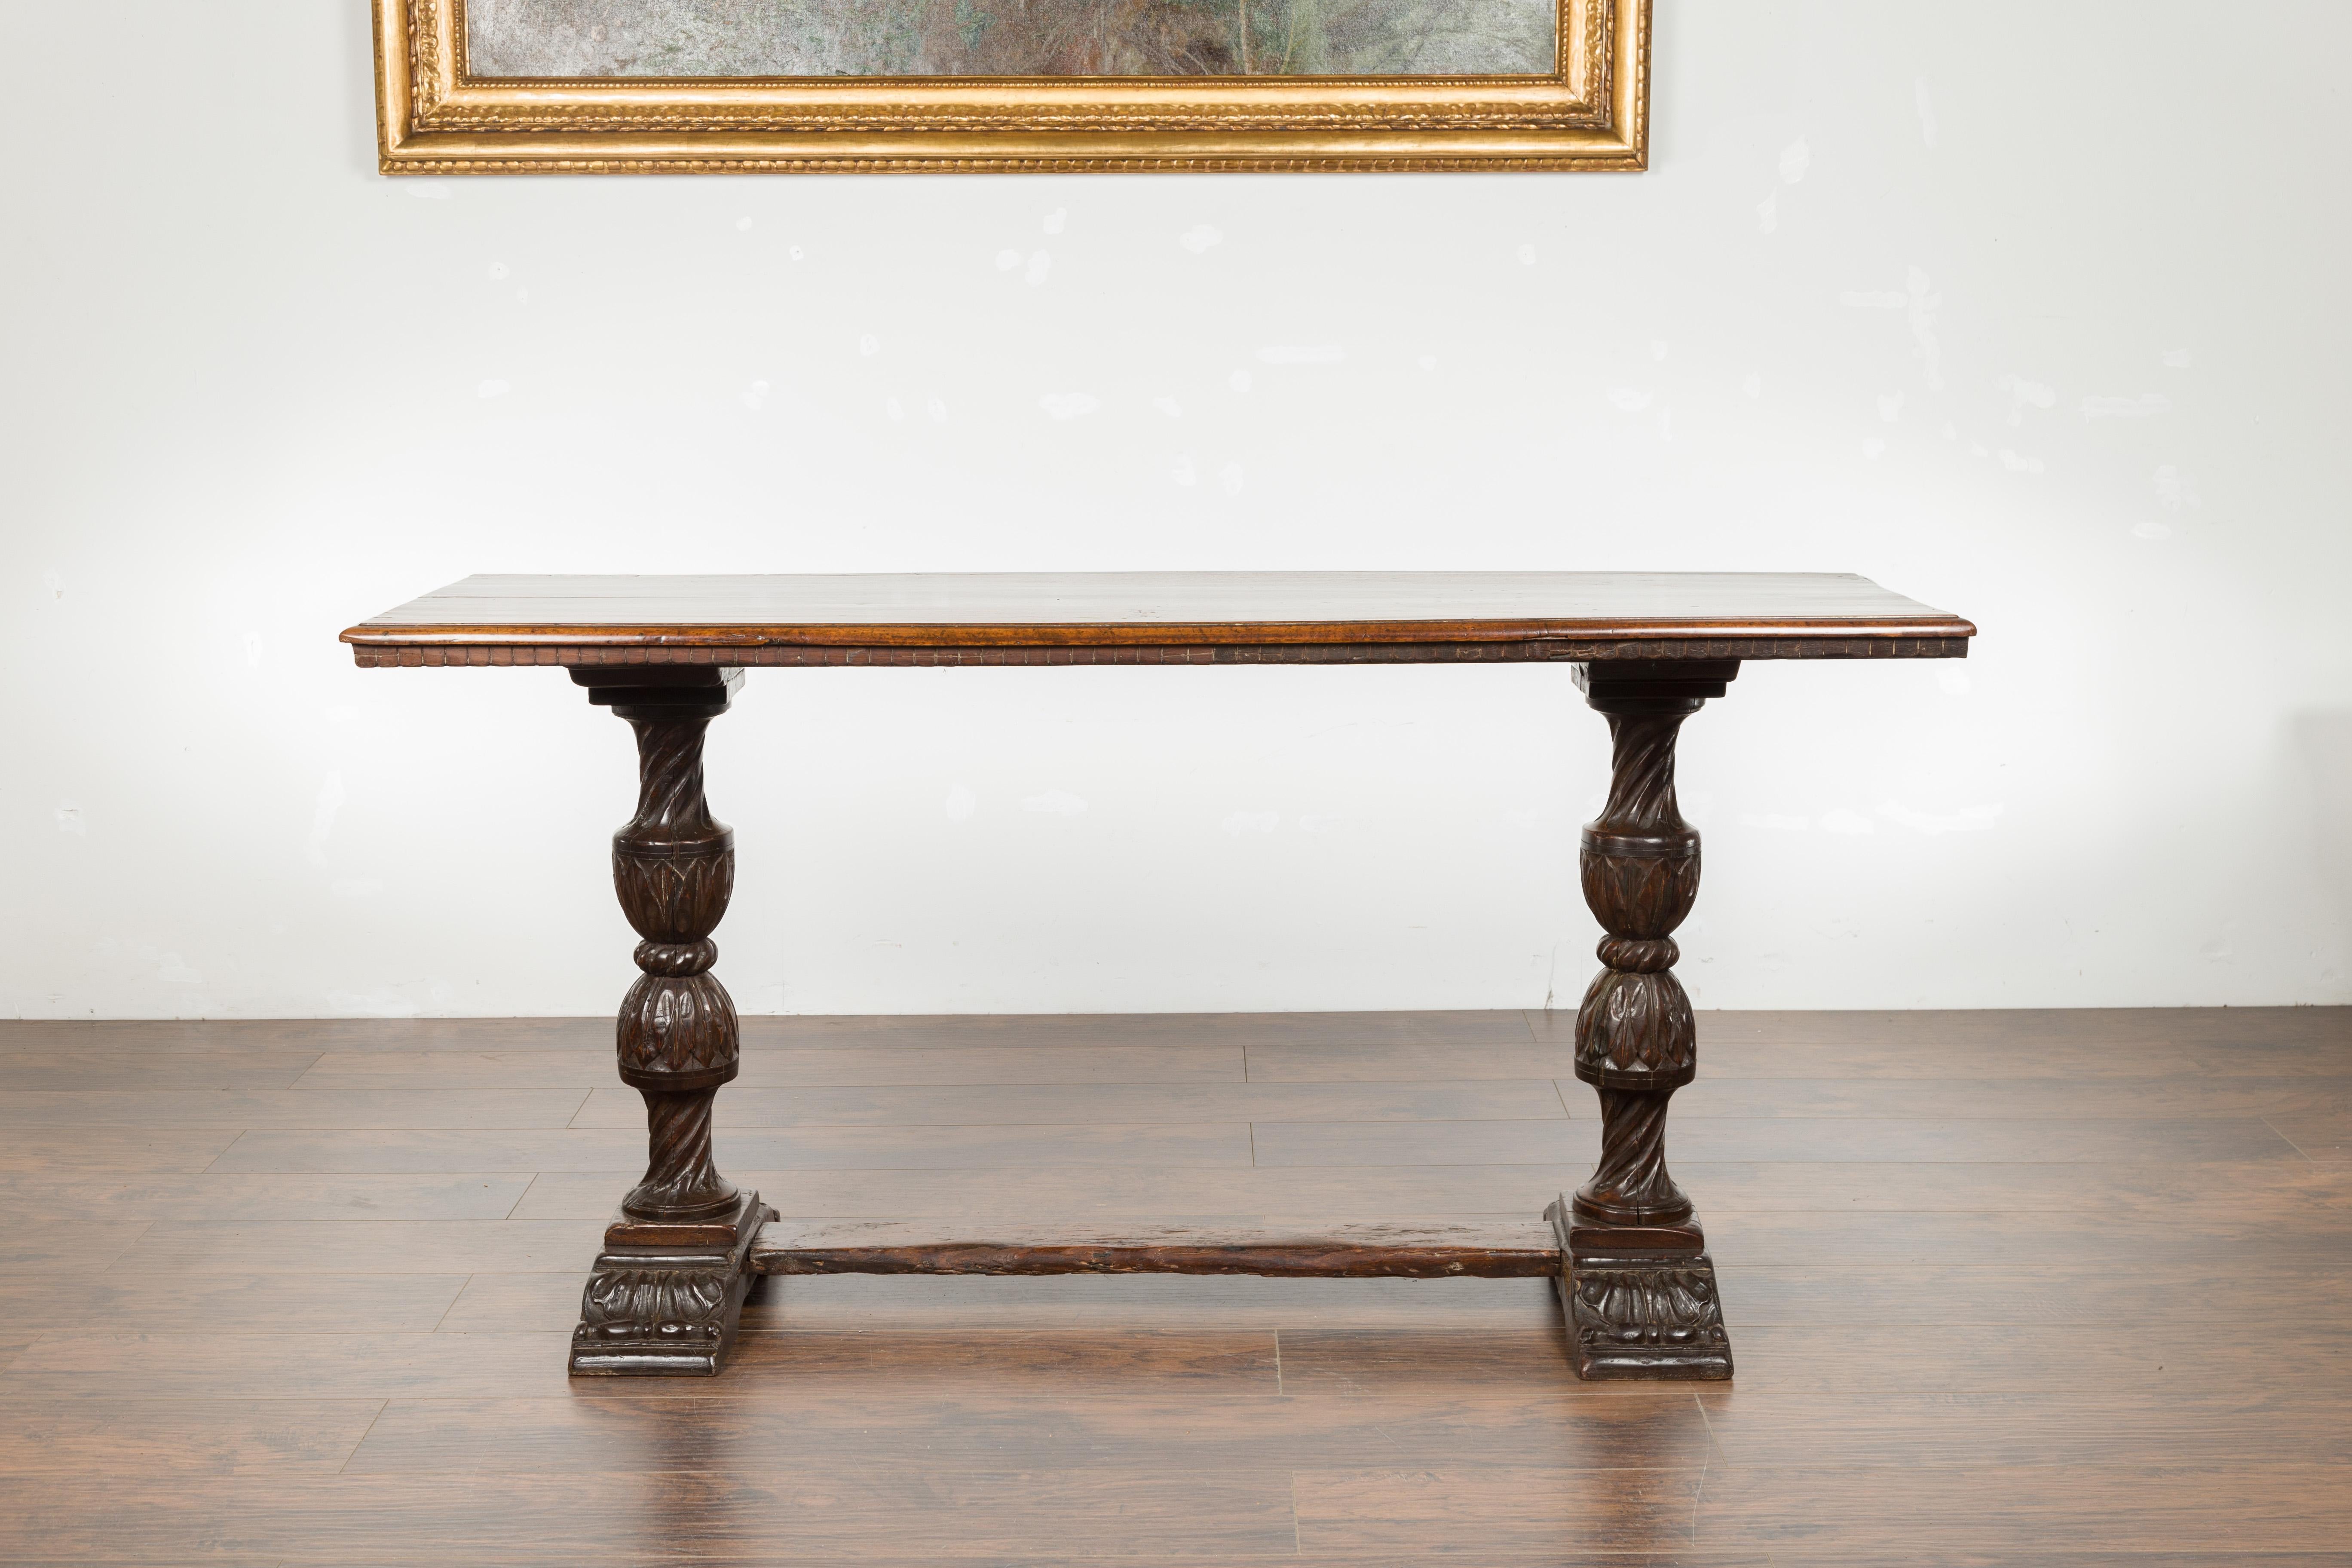 An Italian walnut console table from the early 19th century, with dentil molding, carved legs and cross stretcher. Created in Italy during the first quarter of the 19th century, this walnut table features a rectangular top with darker accent in the